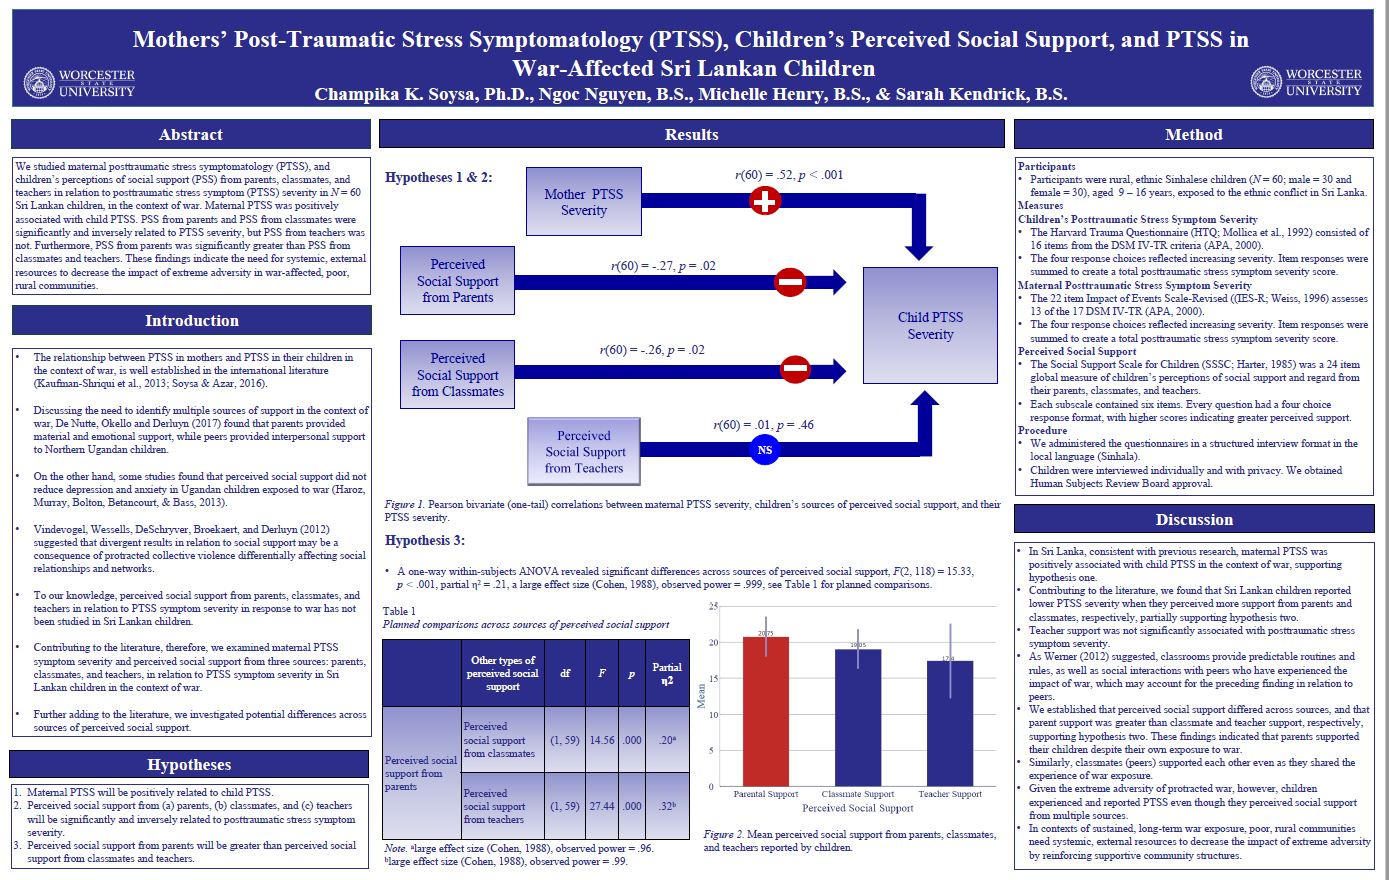 Types of Social Support (Inversely) Associated with PTSD in Sri Lankan Children 